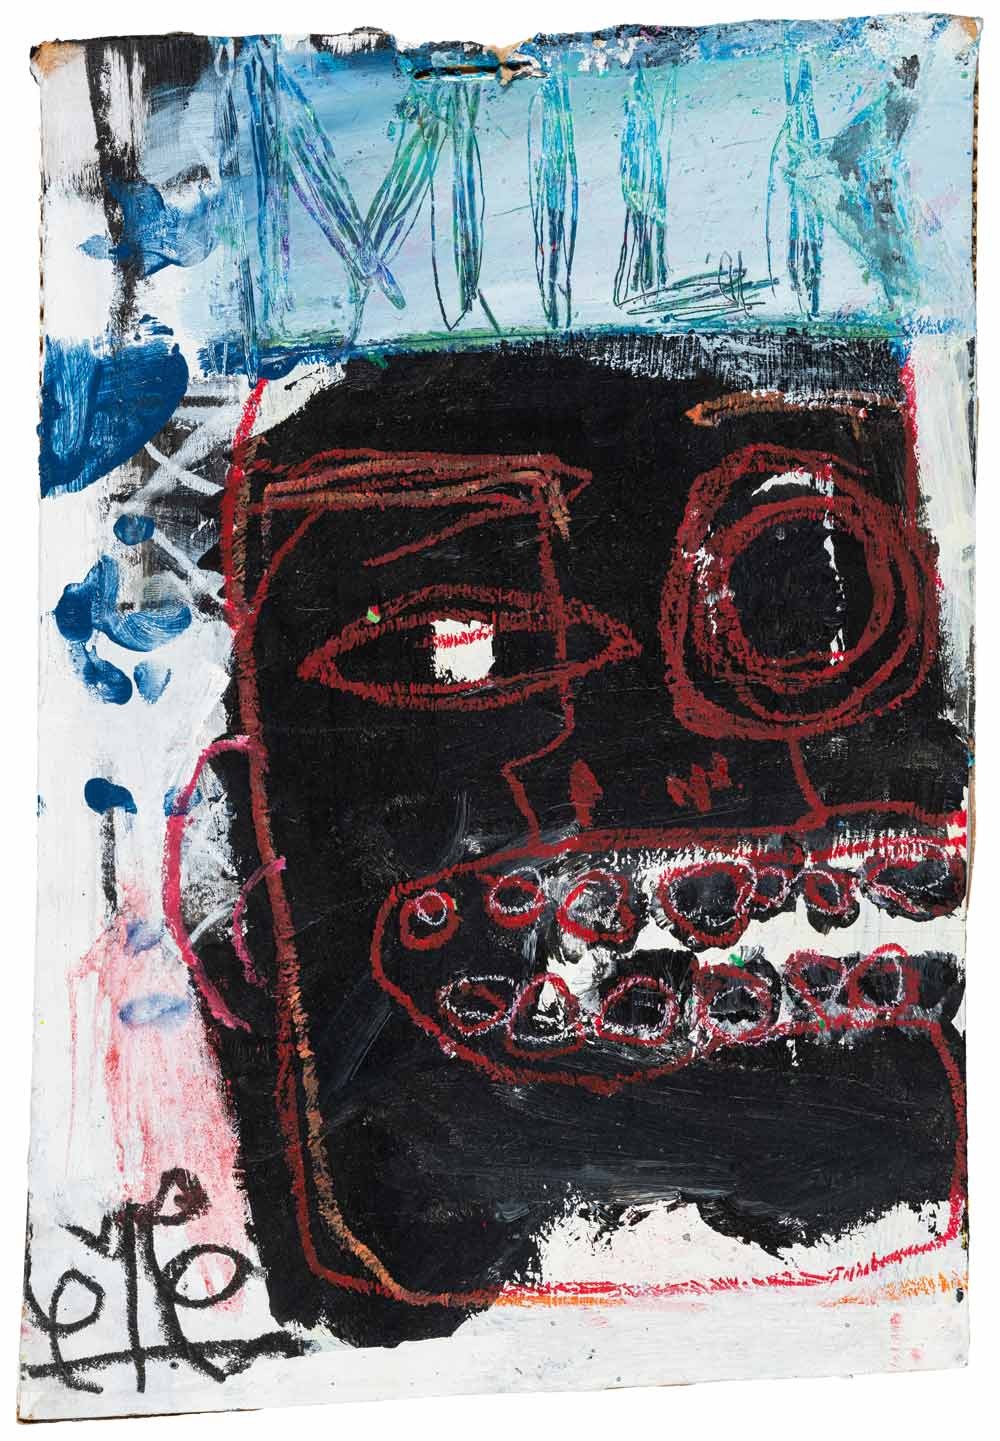 Orlando Museum of Art's 'Heroes and Monsters' reveals unshown works by modern master Jean-Michel Basquiat